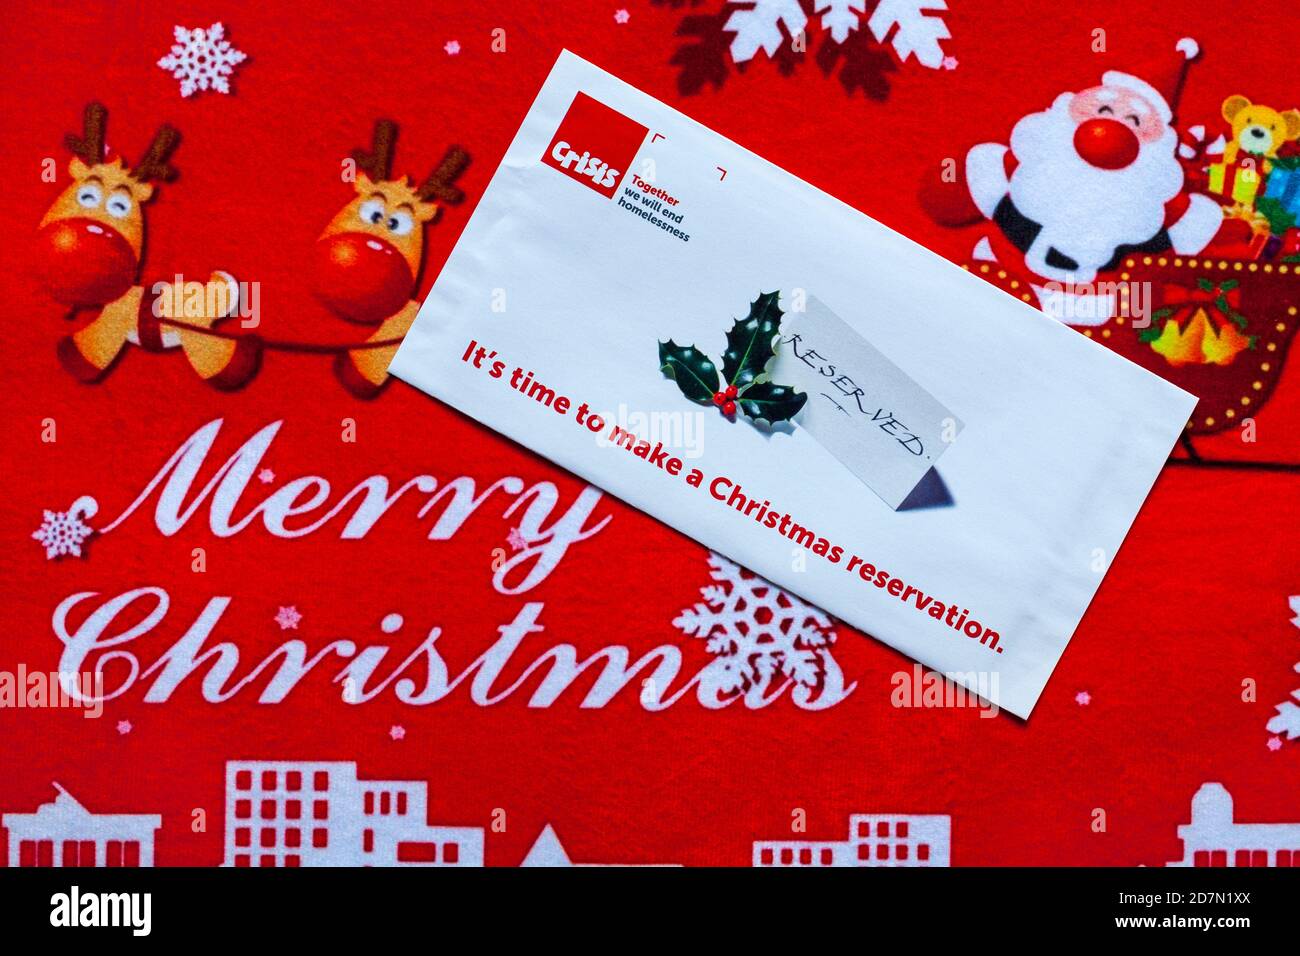 Post on Christmas mat - charity appeal, Crisis together we will end homelessness - it's time to make a Christmas reservation - Merry Christmas Stock Photo